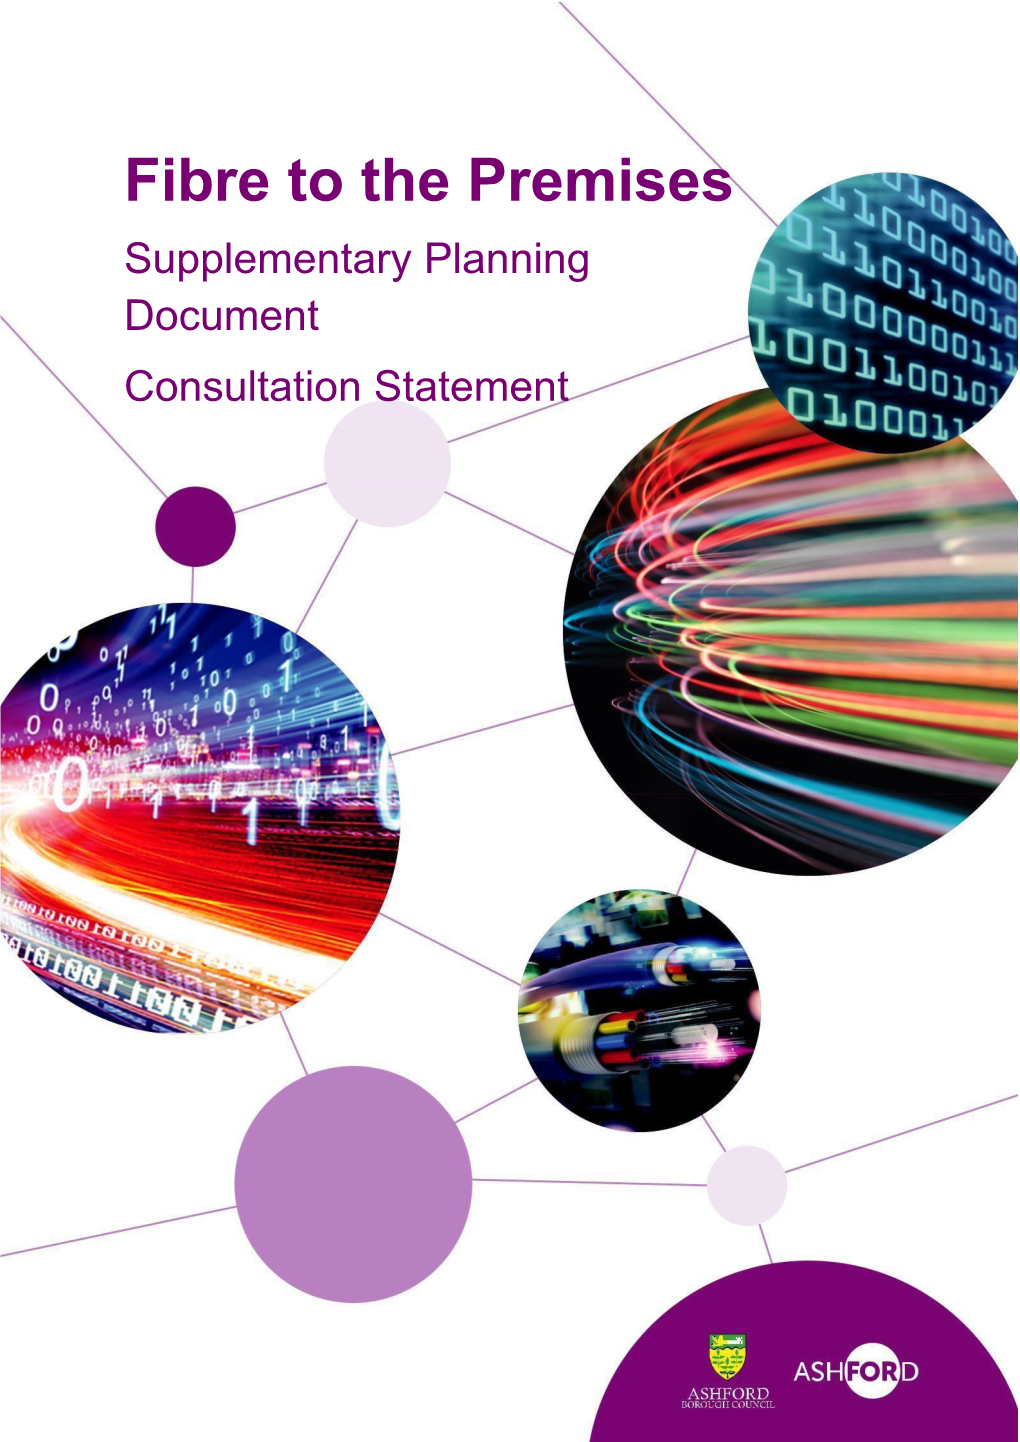 Fibre to the Premises Supplementary Planning Document Consultation Statement